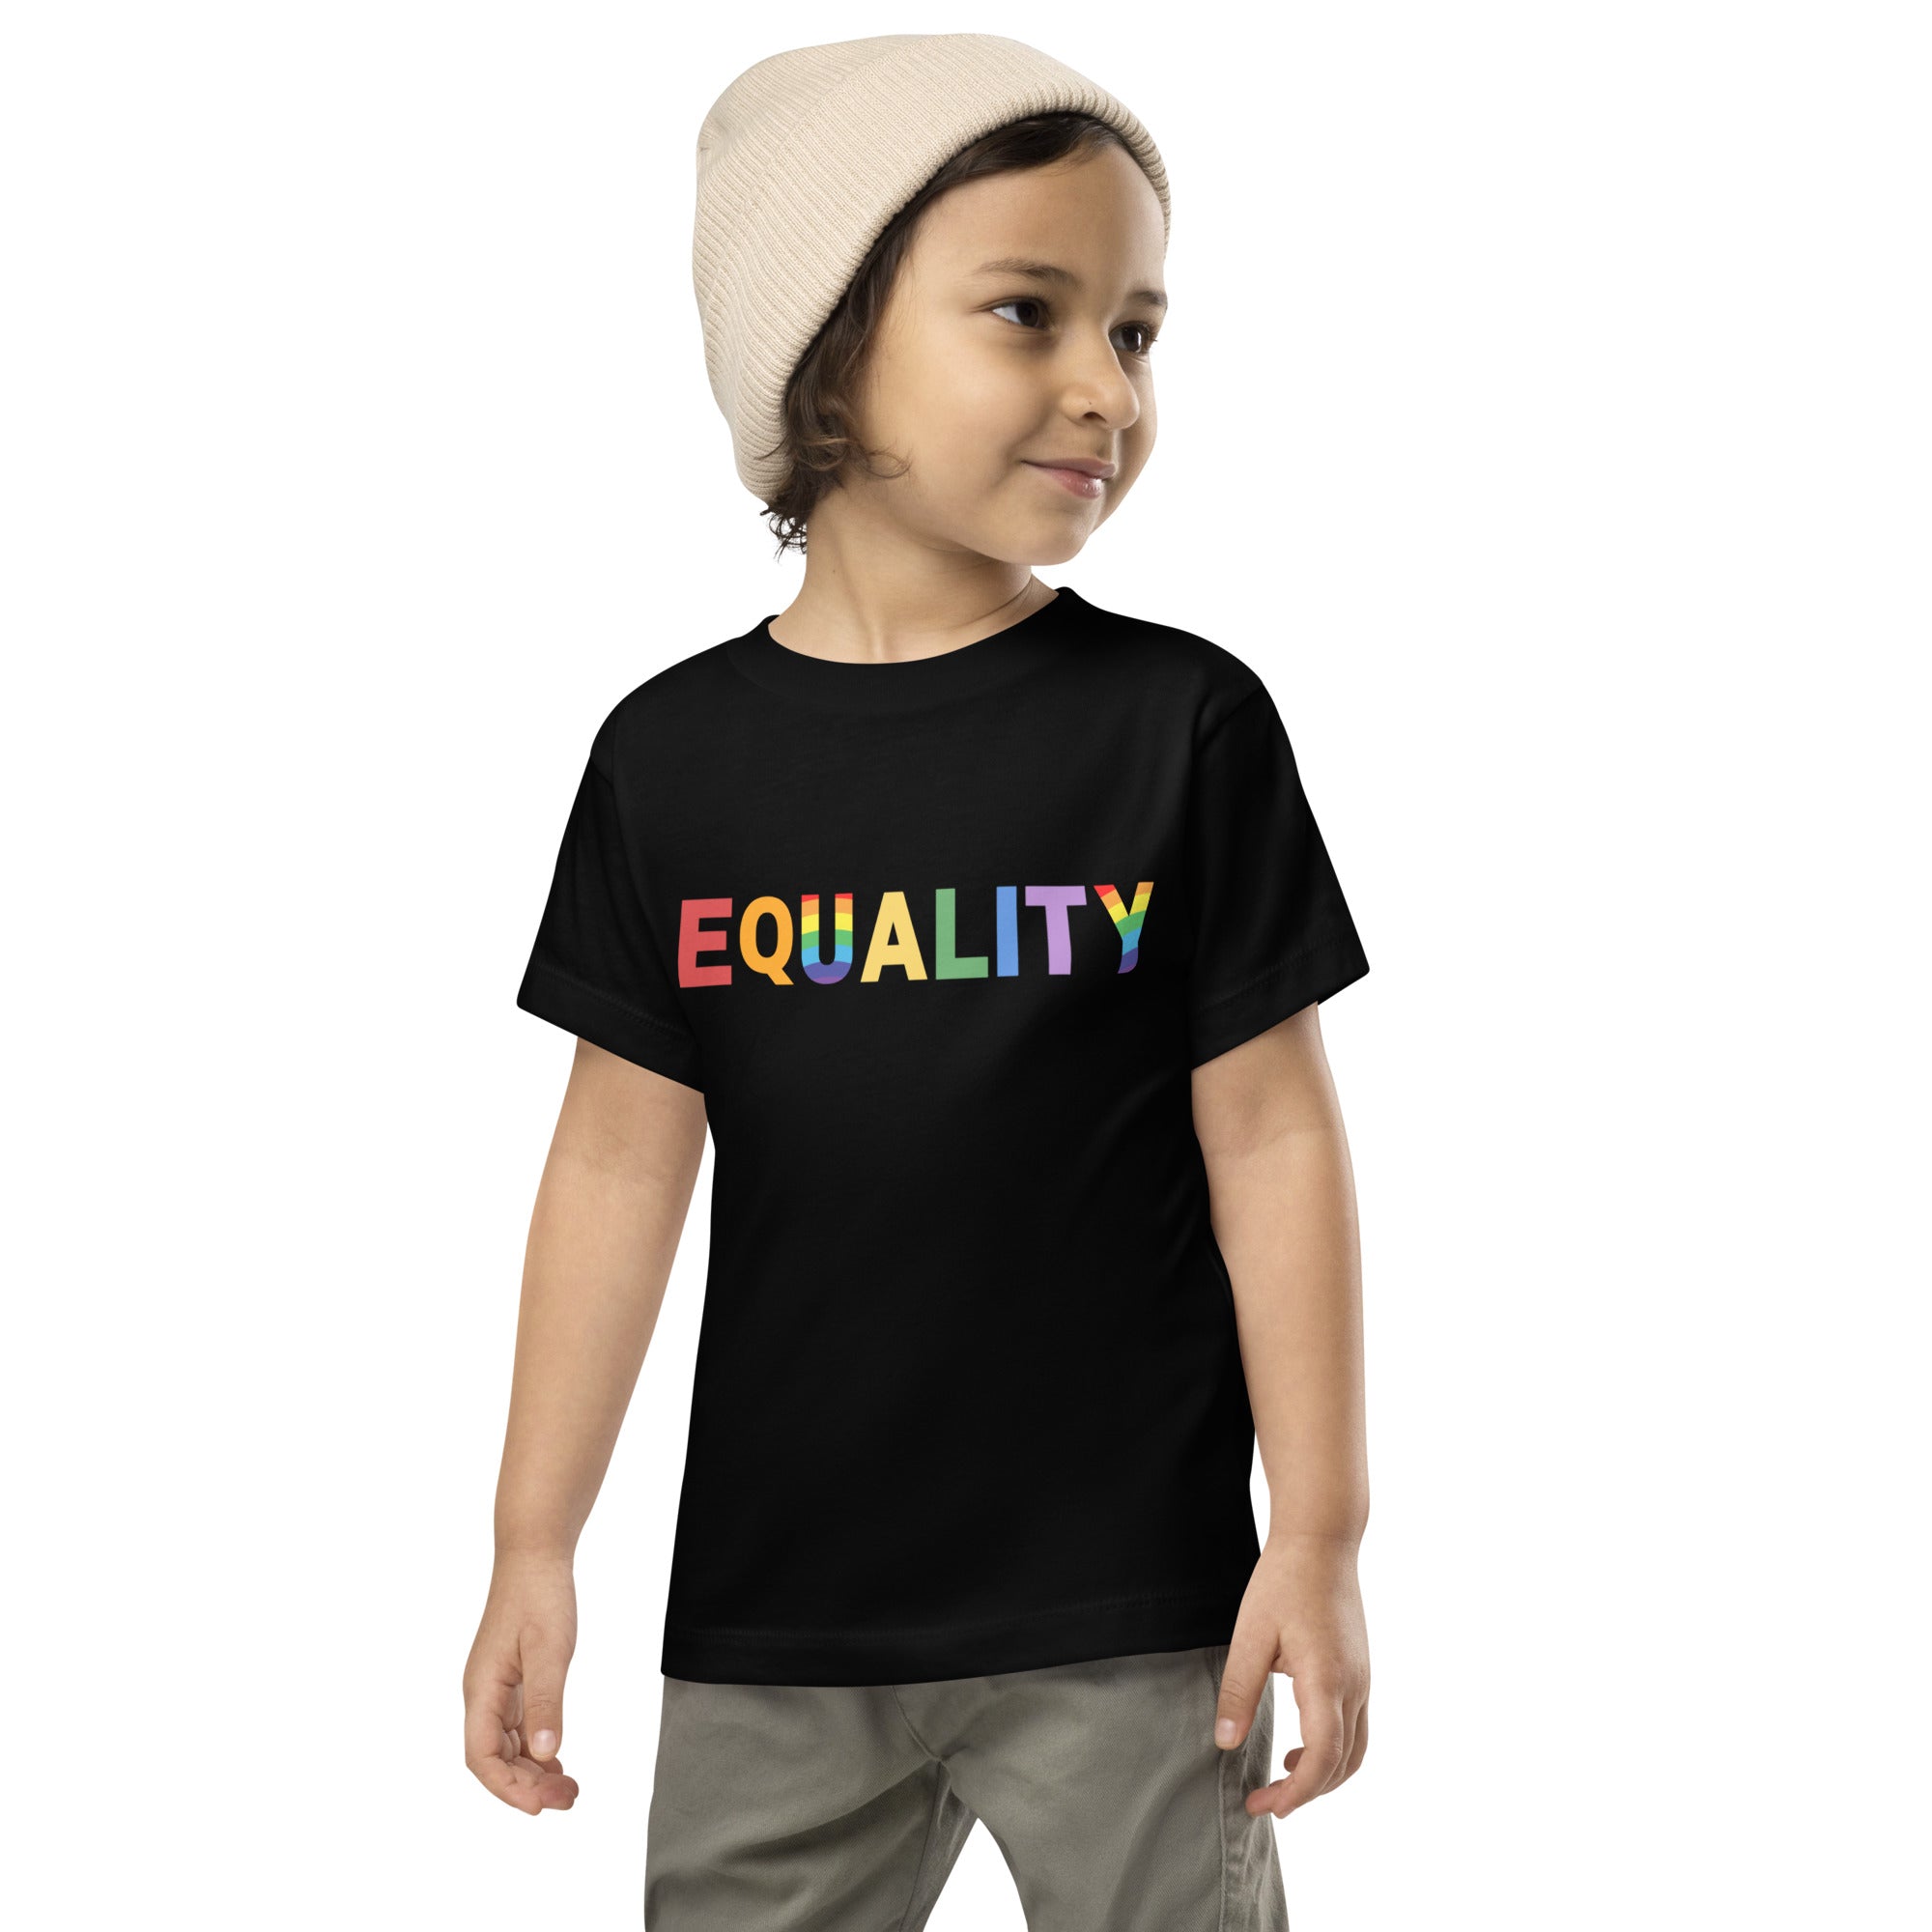 Equality - Toddler Short Sleeve Tee